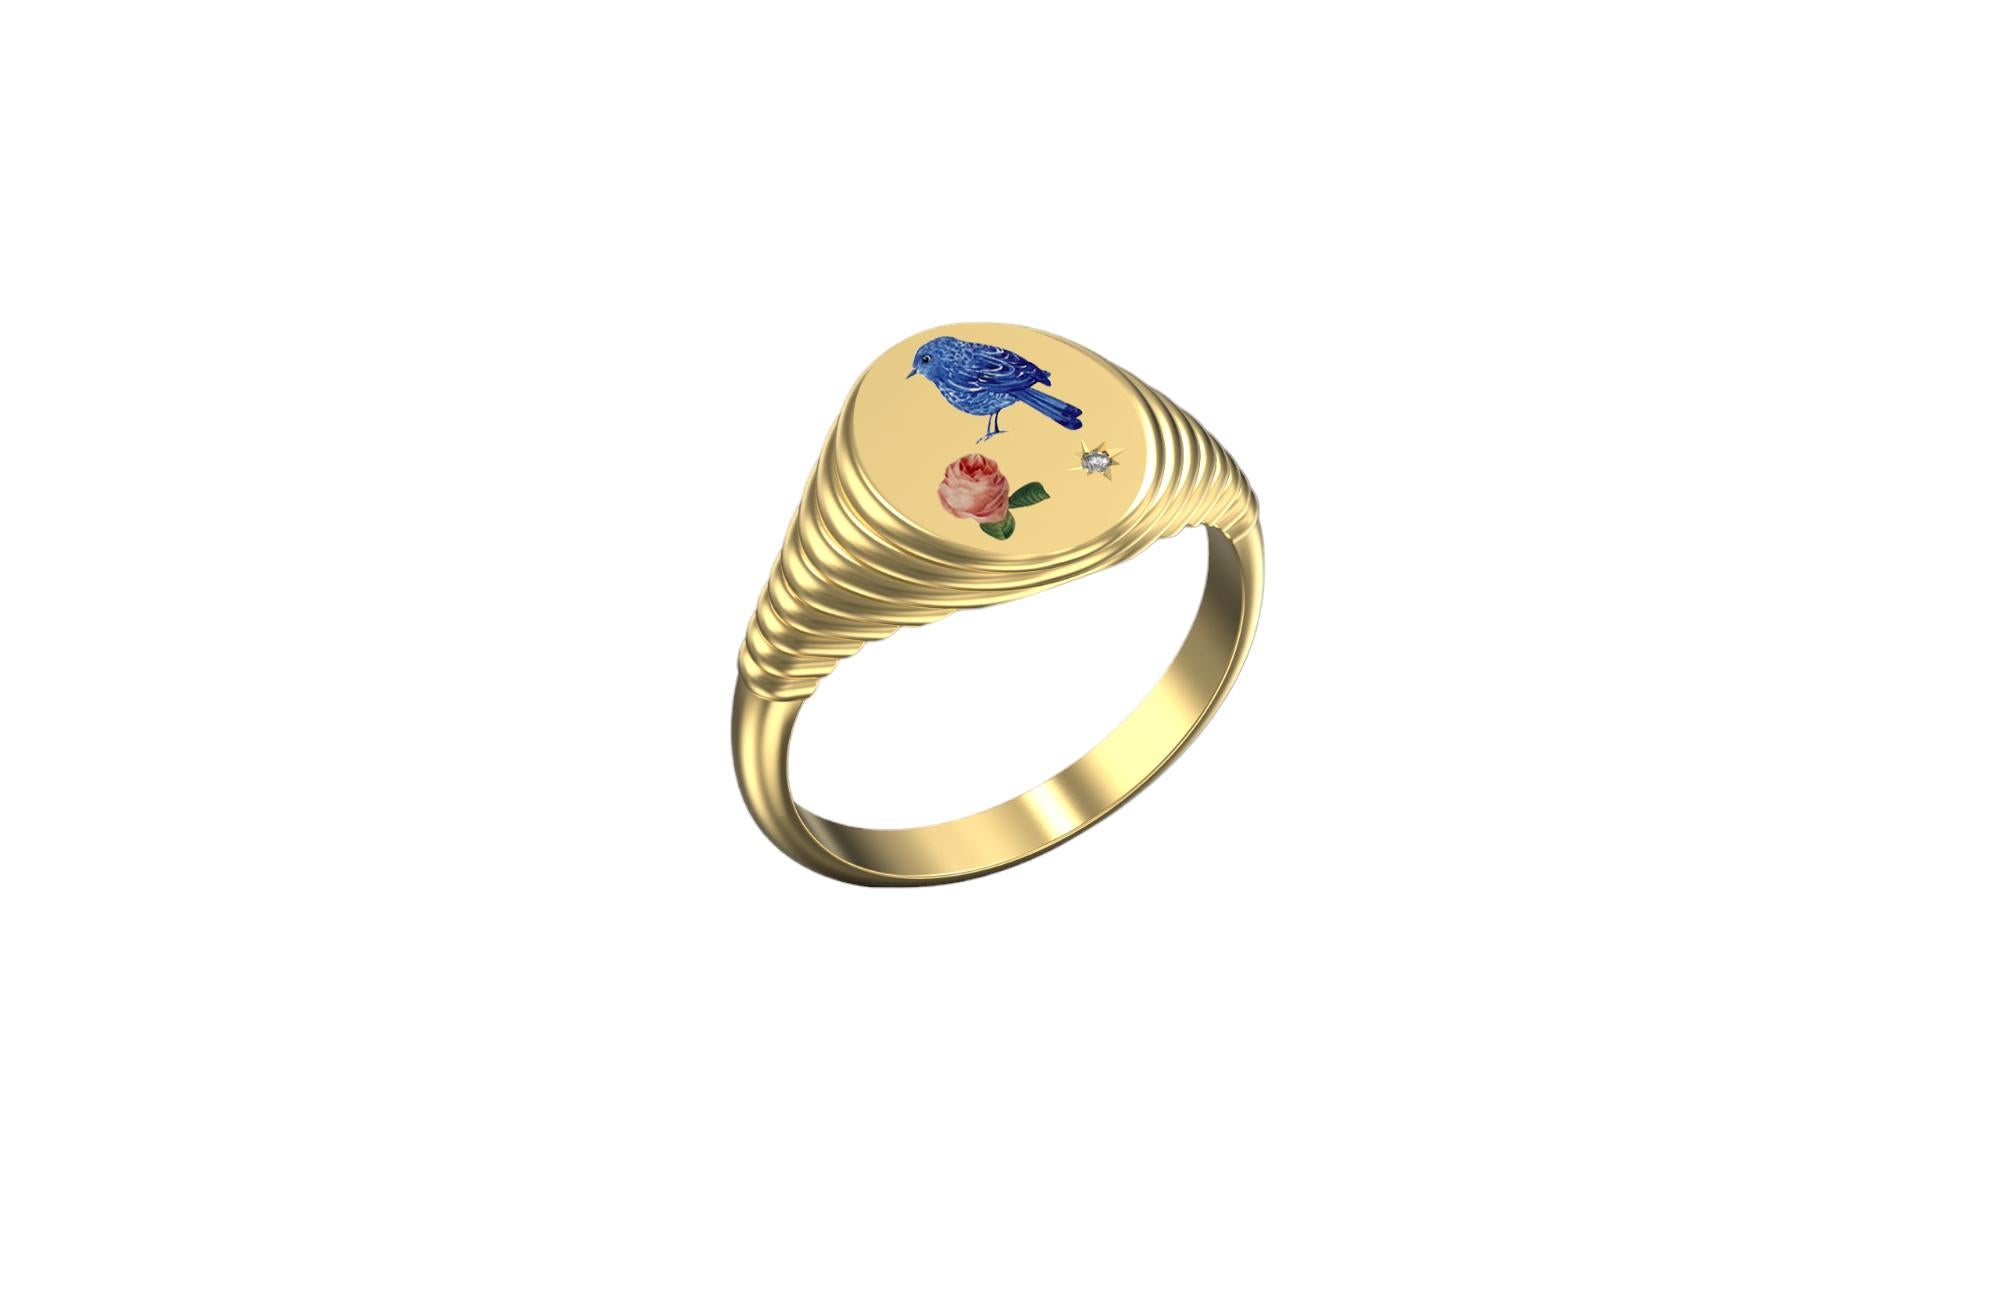 Inspired by ancient Chinese painting, this ring brings art and beauty. 



Oval ring face: 9x11mm, band width: 2.5mm



Enamel hand-painted, complimented by a star set diamond. 18kt yellow gold.



This item is made-to-order and customised for you